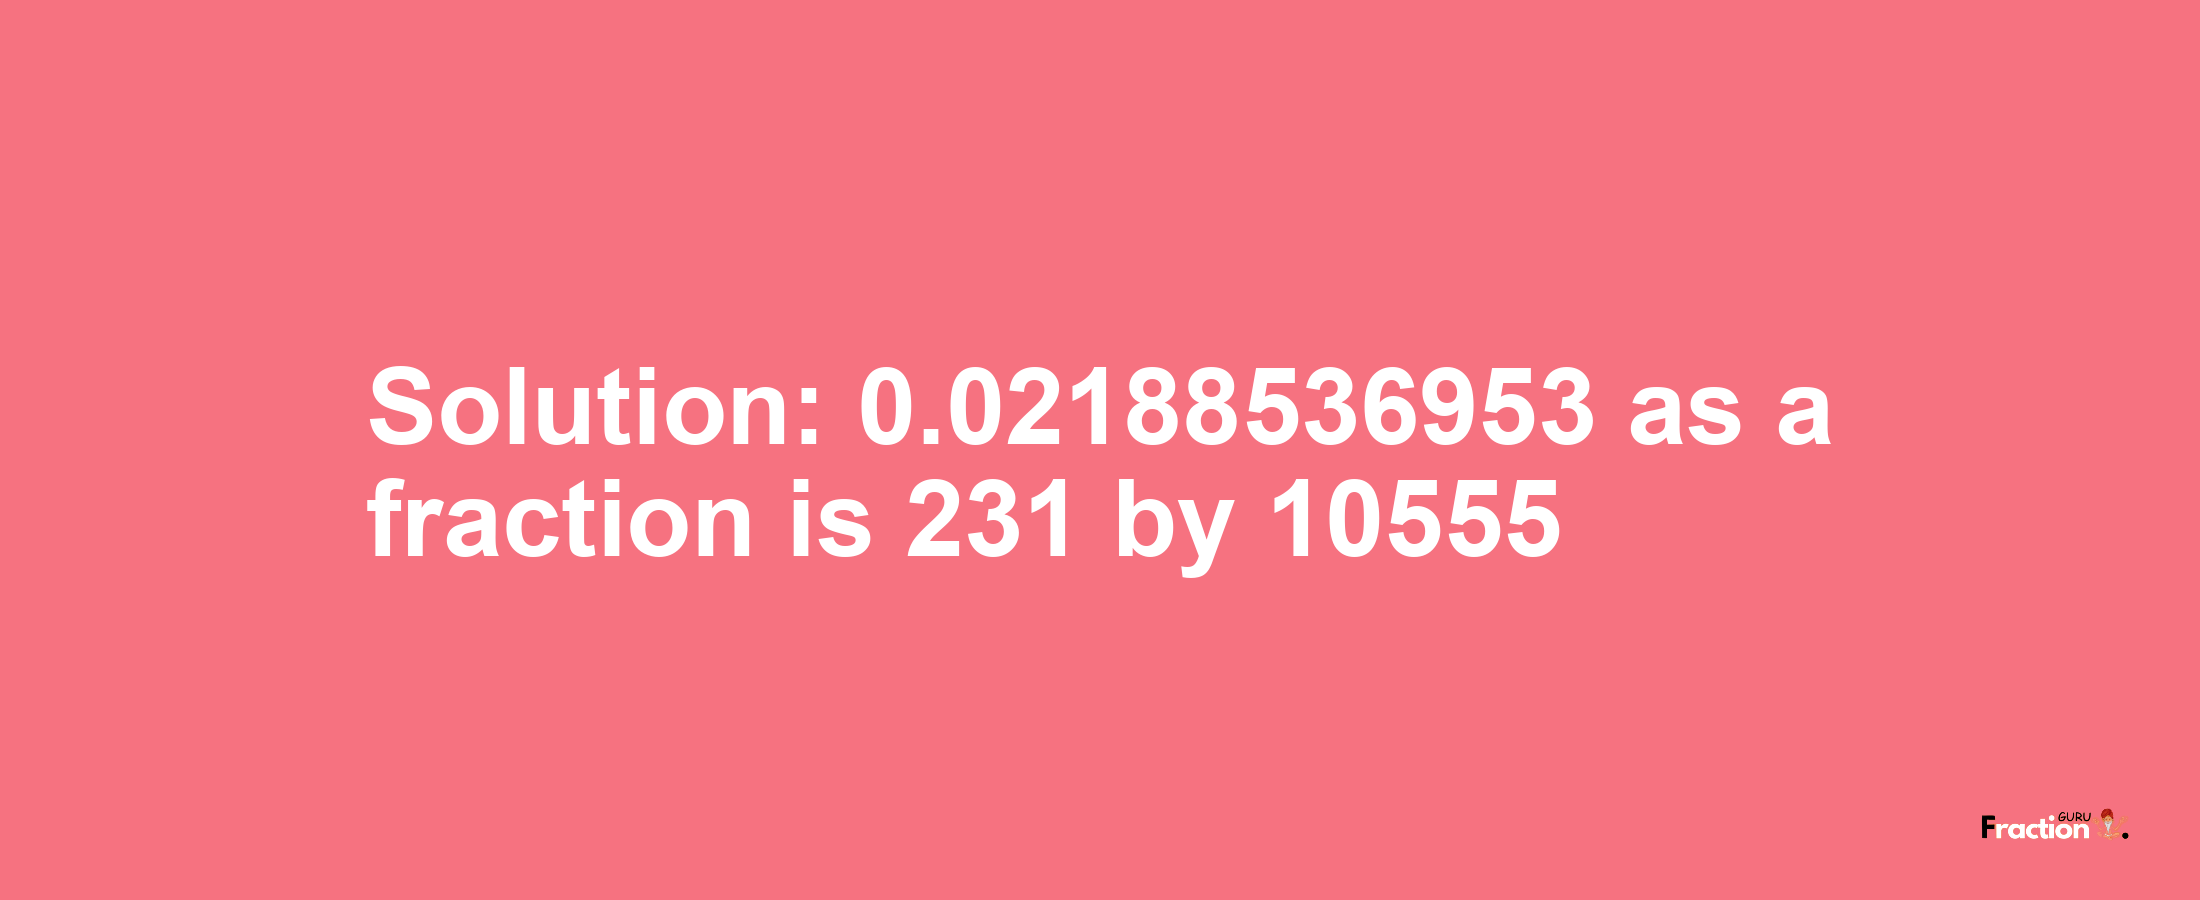 Solution:0.02188536953 as a fraction is 231/10555